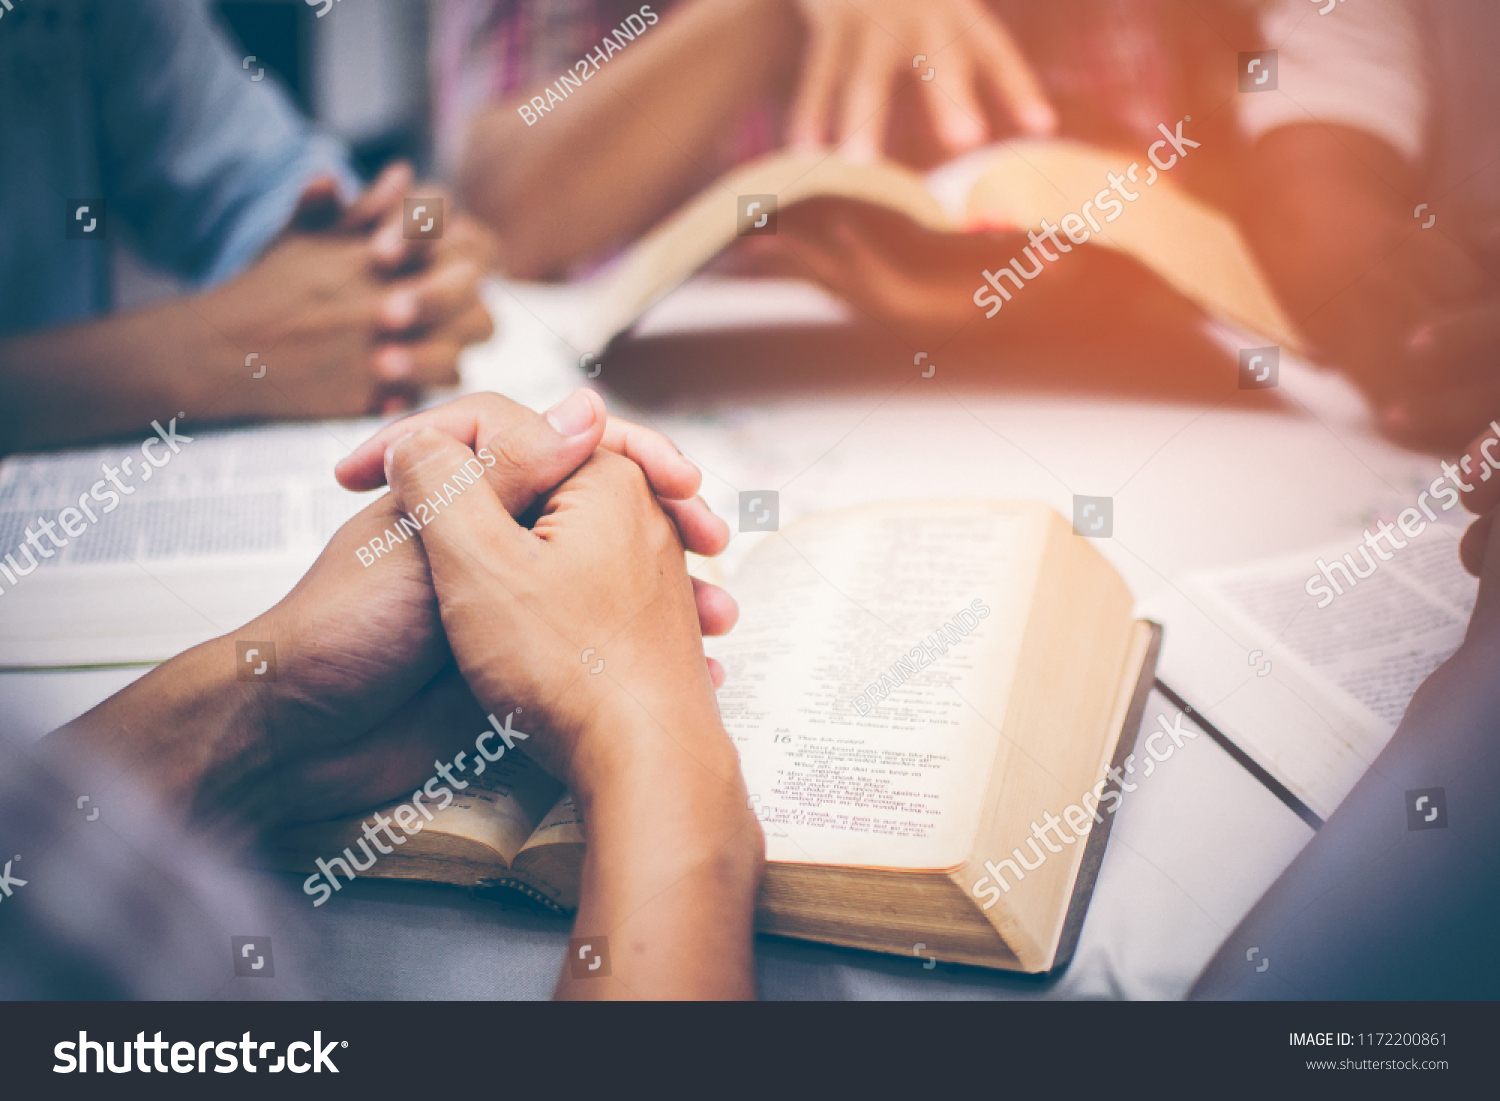 Christians are congregants join hands to pray and seek the blessings of God, the Holy Bible. They were reading the Bible and sharing the gospel with copy space. #1172200861